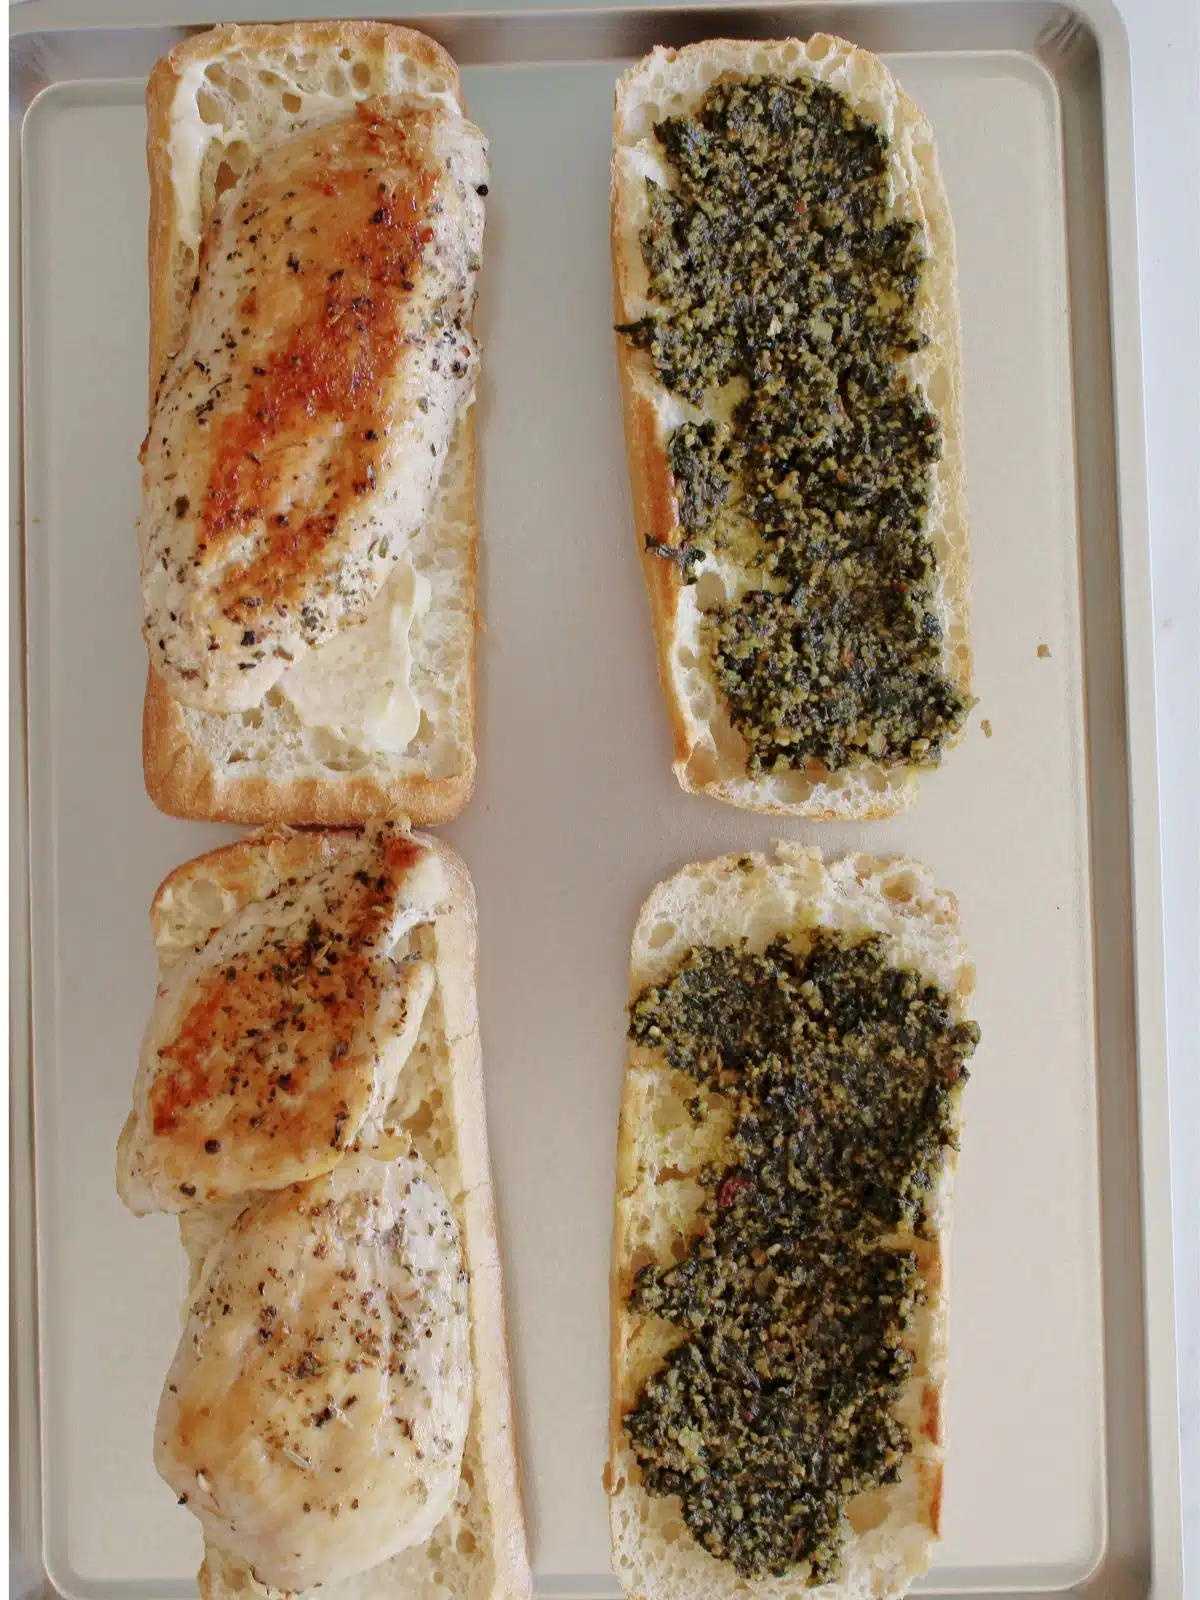 Sandwich being assembled on a sheet pan with pesto and chicken